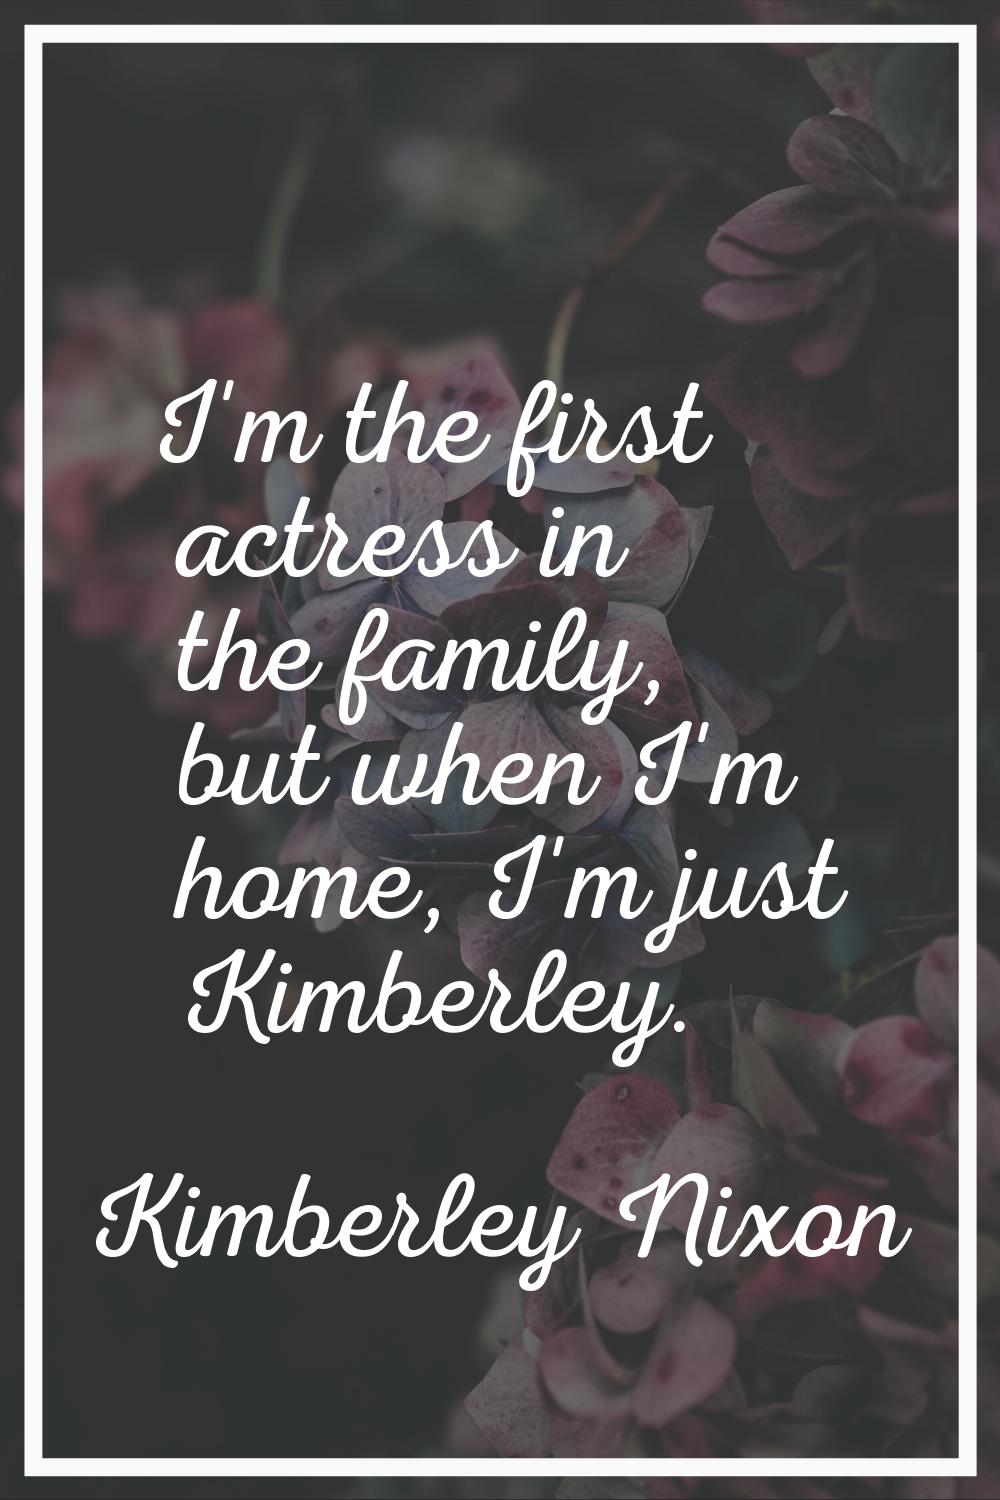 I'm the first actress in the family, but when I'm home, I'm just Kimberley.